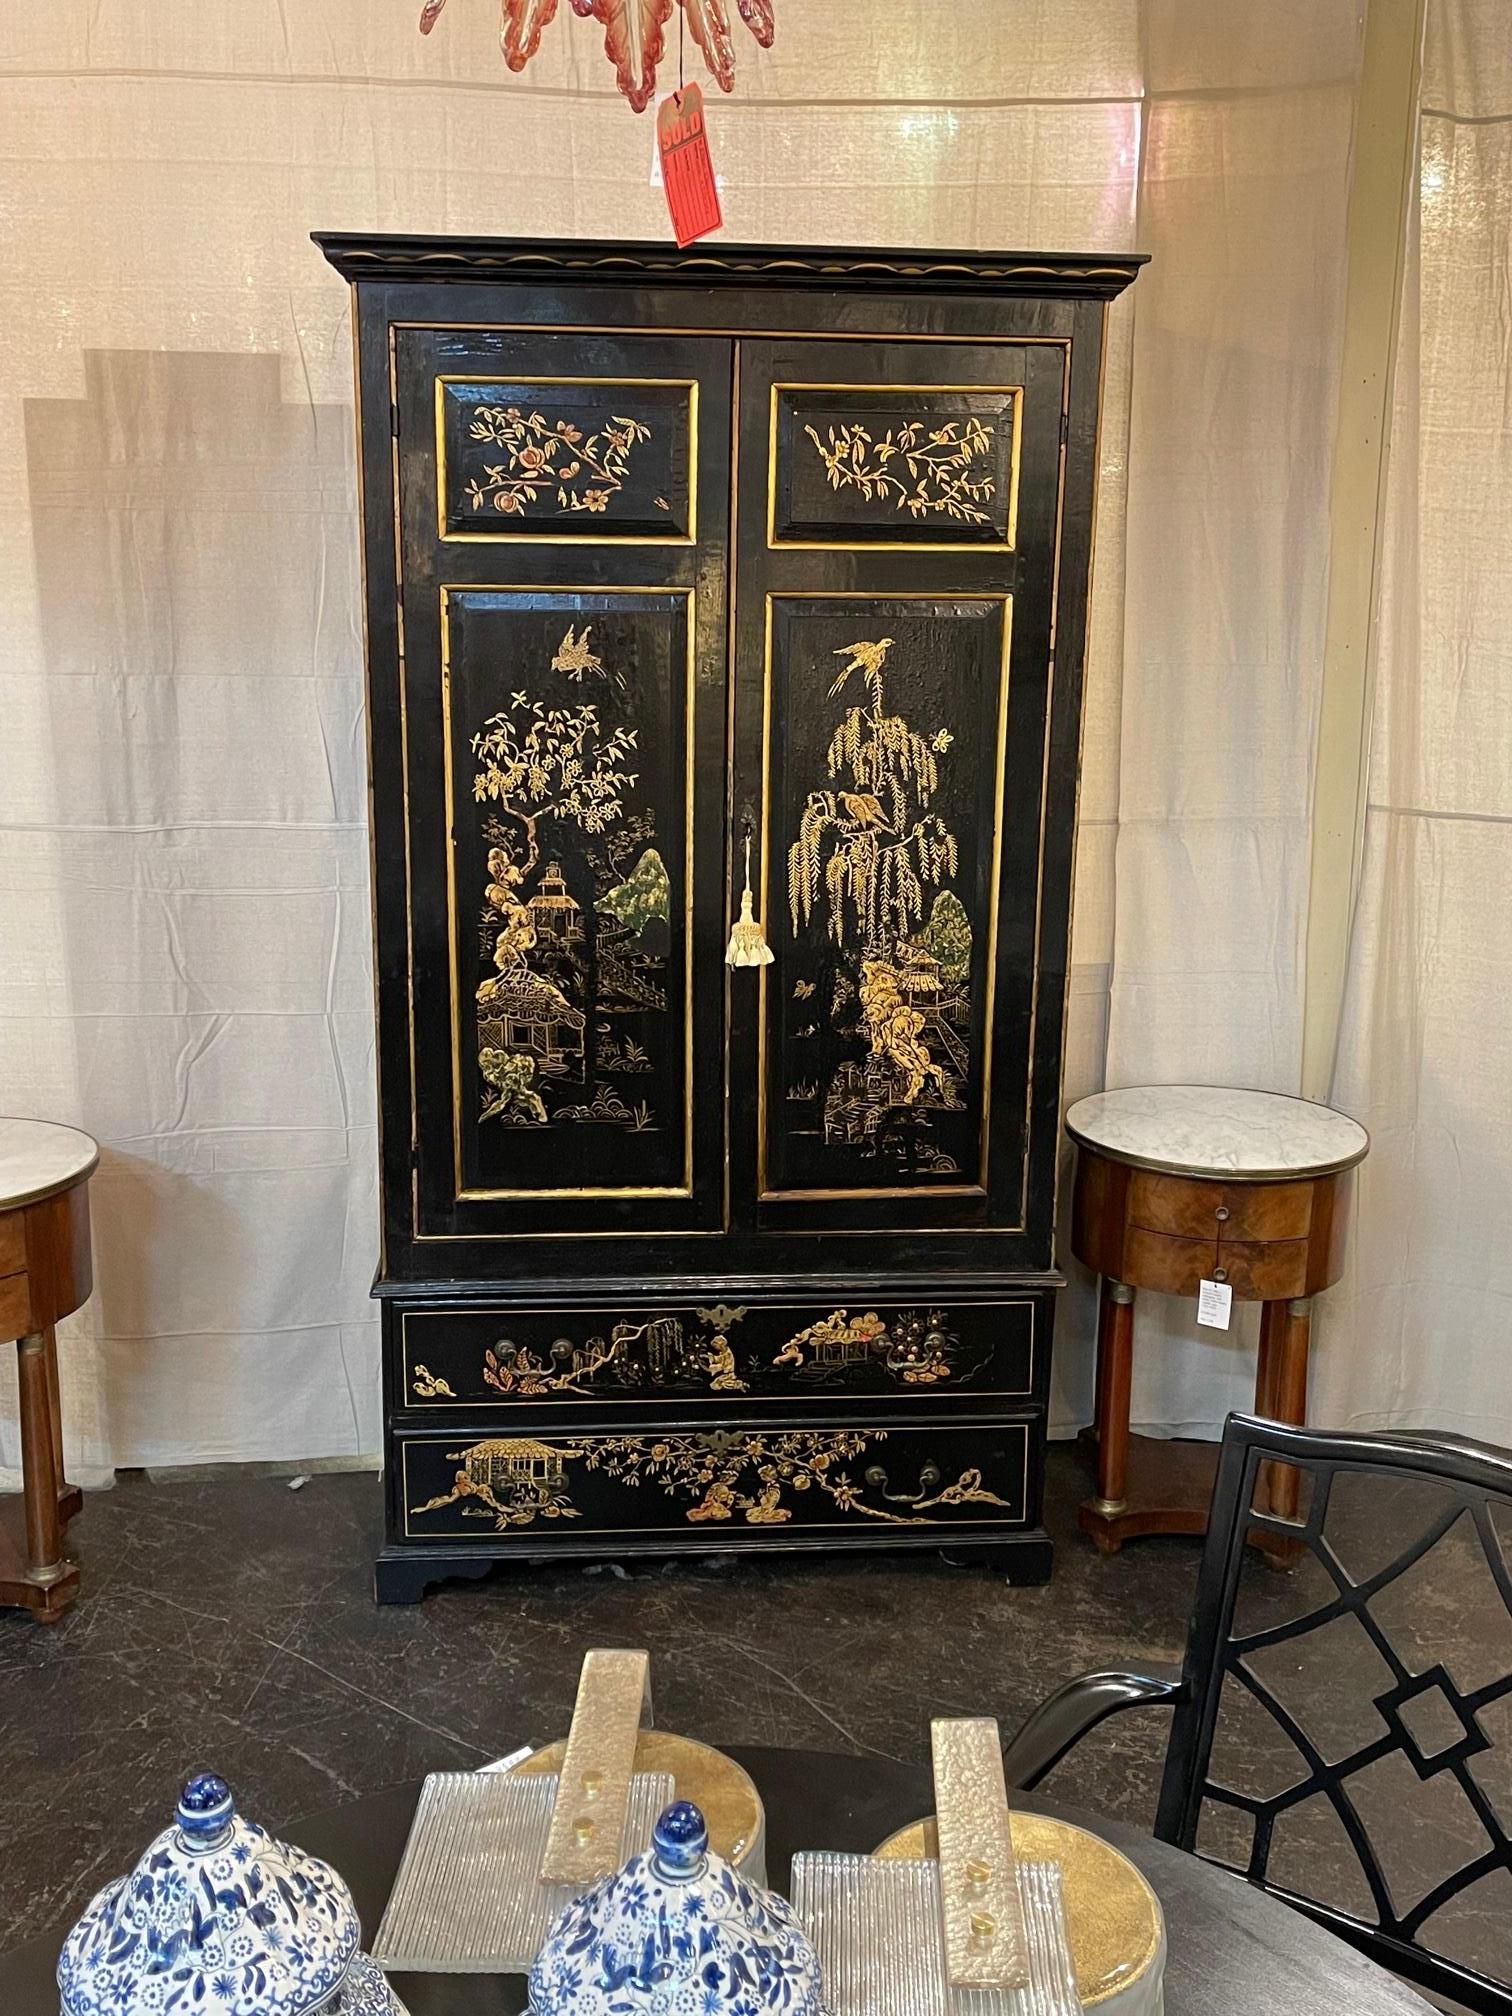 19th century English black lacquered chinoiserie cabinet. Circa 1850. This beautiful piece is sure to make a statement.